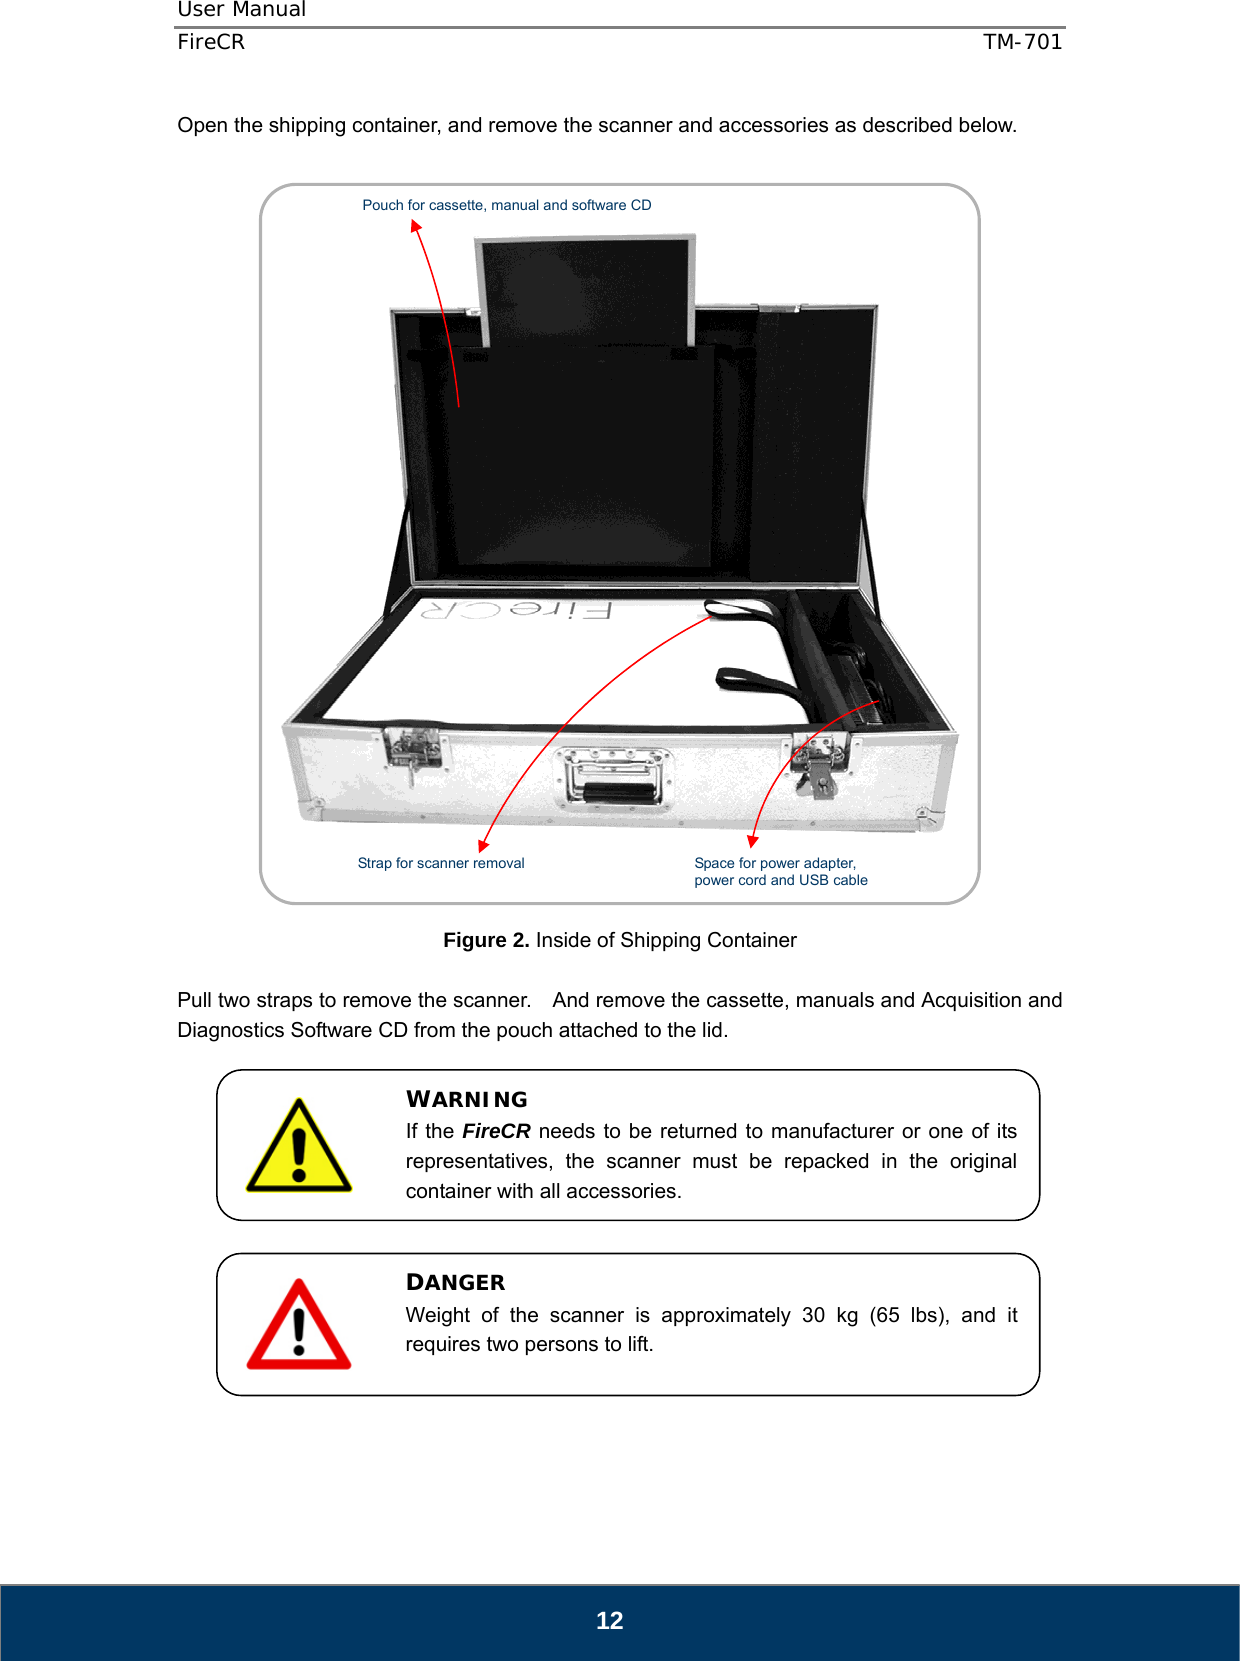 User Manual  FireCR  TM-701   12 Open the shipping container, and remove the scanner and accessories as described below.        Figure 2. Inside of Shipping Container  Pull two straps to remove the scanner.    And remove the cassette, manuals and Acquisition and Diagnostics Software CD from the pouch attached to the lid.               WARNING If the FireCR needs to be returned to manufacturer or one of its representatives, the scanner must be repacked in the original container with all accessories. DANGER Weight of the scanner is approximately 30 kg (65 lbs), and it requires two persons to lift.  Pouch for cassette, manual and software CD Strap for scanner removal  Space for power adapter, power cord and USB cable 